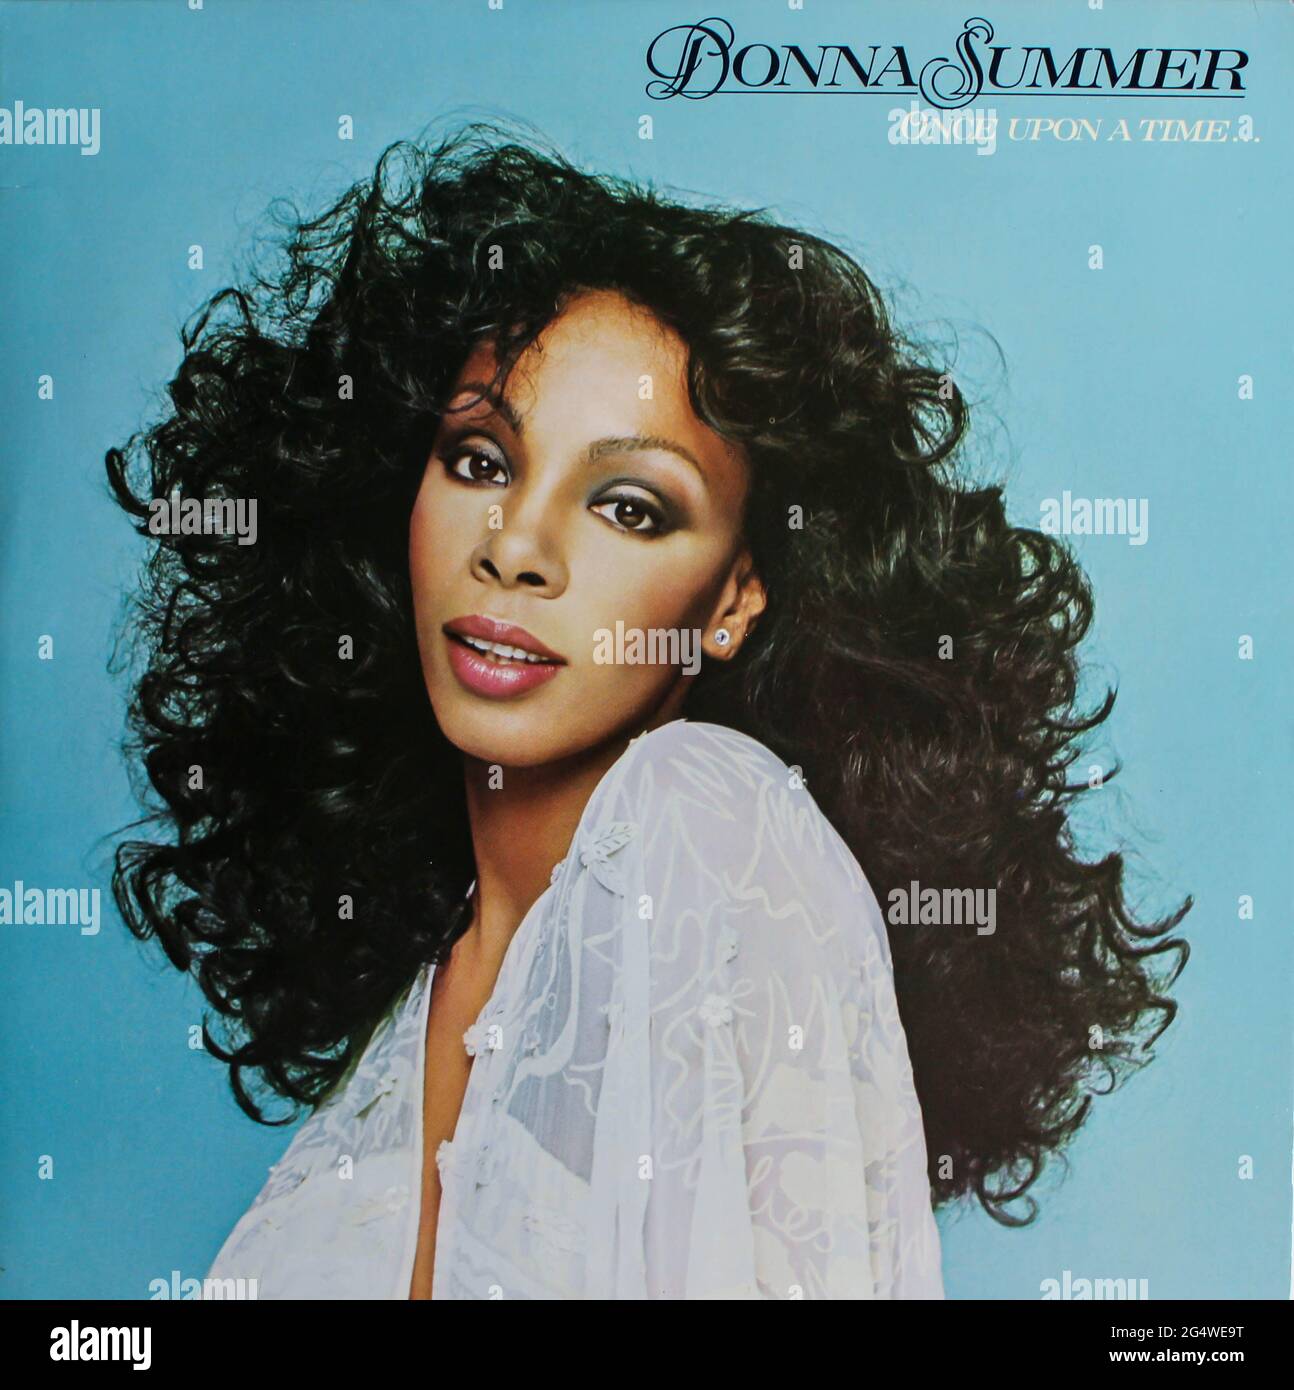 Disco, R&b, dance and soul artist Donna Summer music album on vinyl record  LP disc. Titled: Once Upon a Time album cover Stock Photo - Alamy